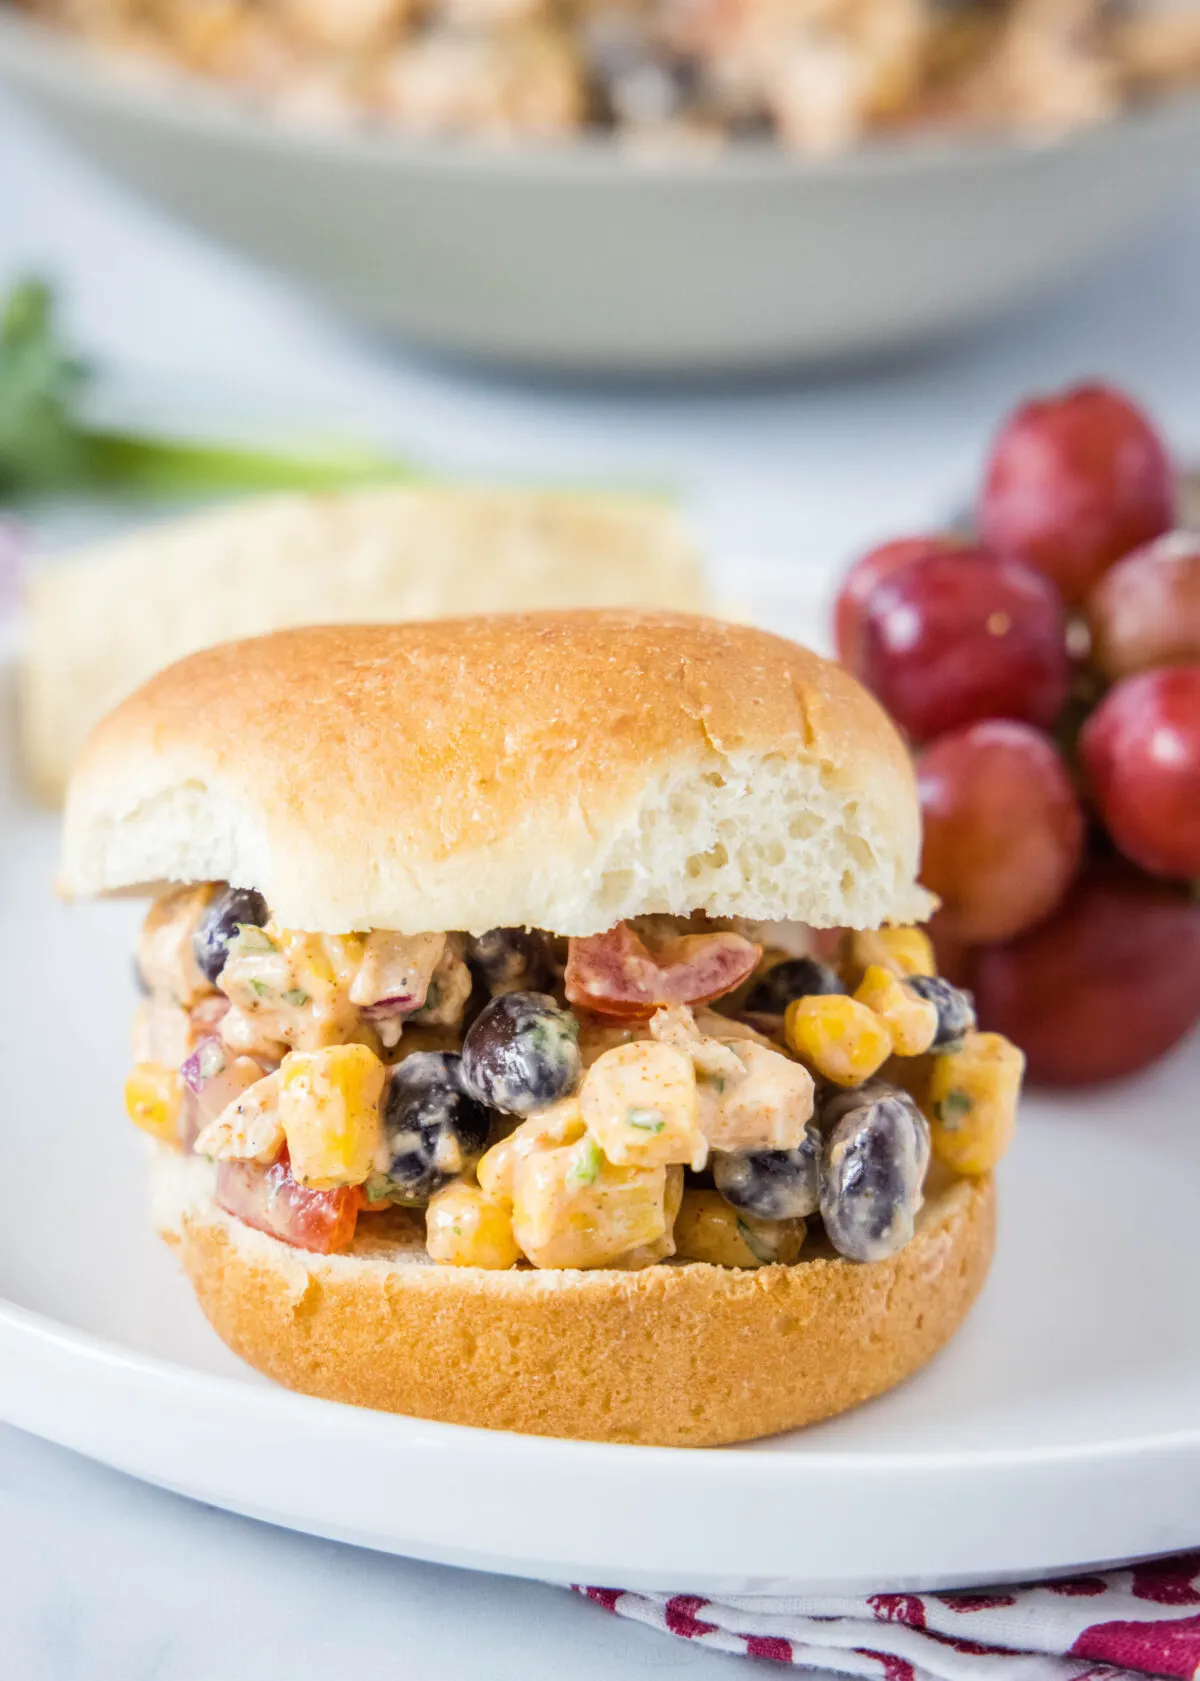 A burger bun filled with chicken salad with corn and beans, on a plate next to some grapes